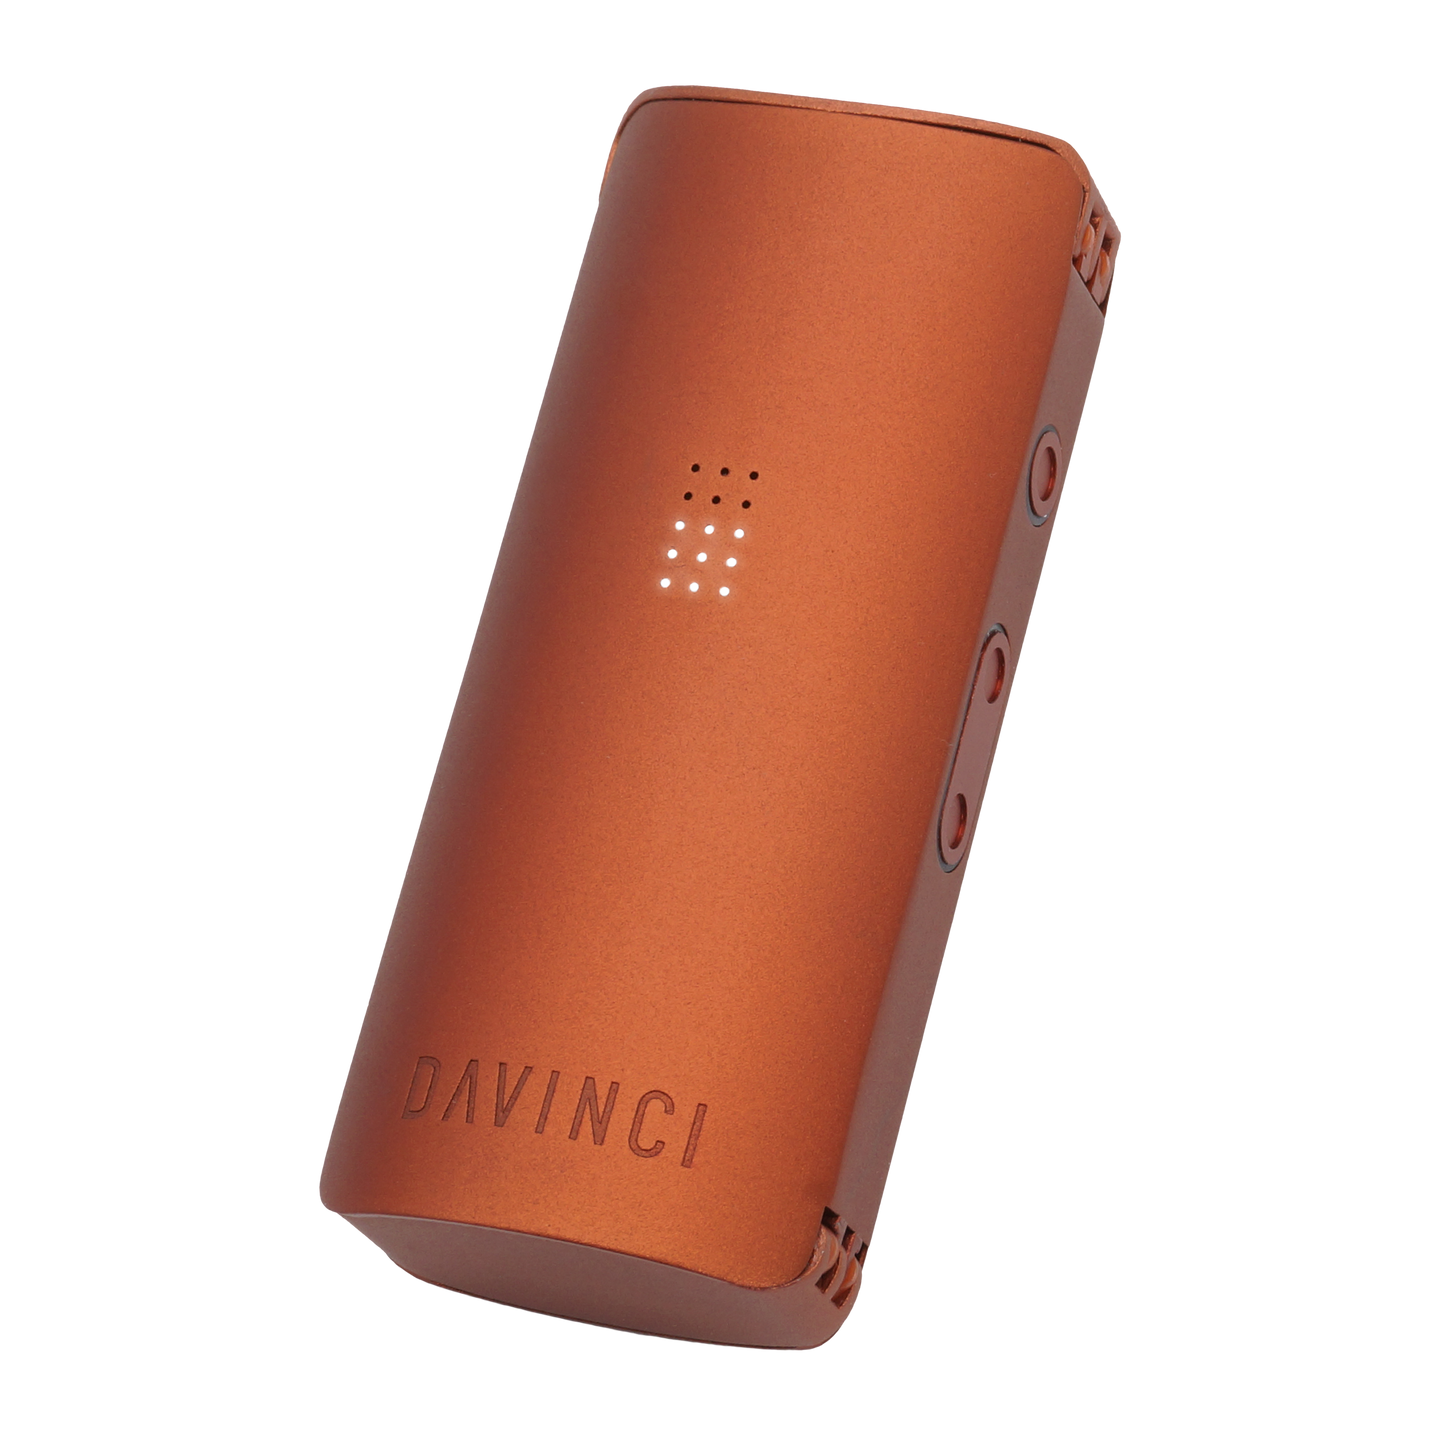 Davinci MIQRO Dry Herb Vaporizer - dry herbs and concentrates. Rust